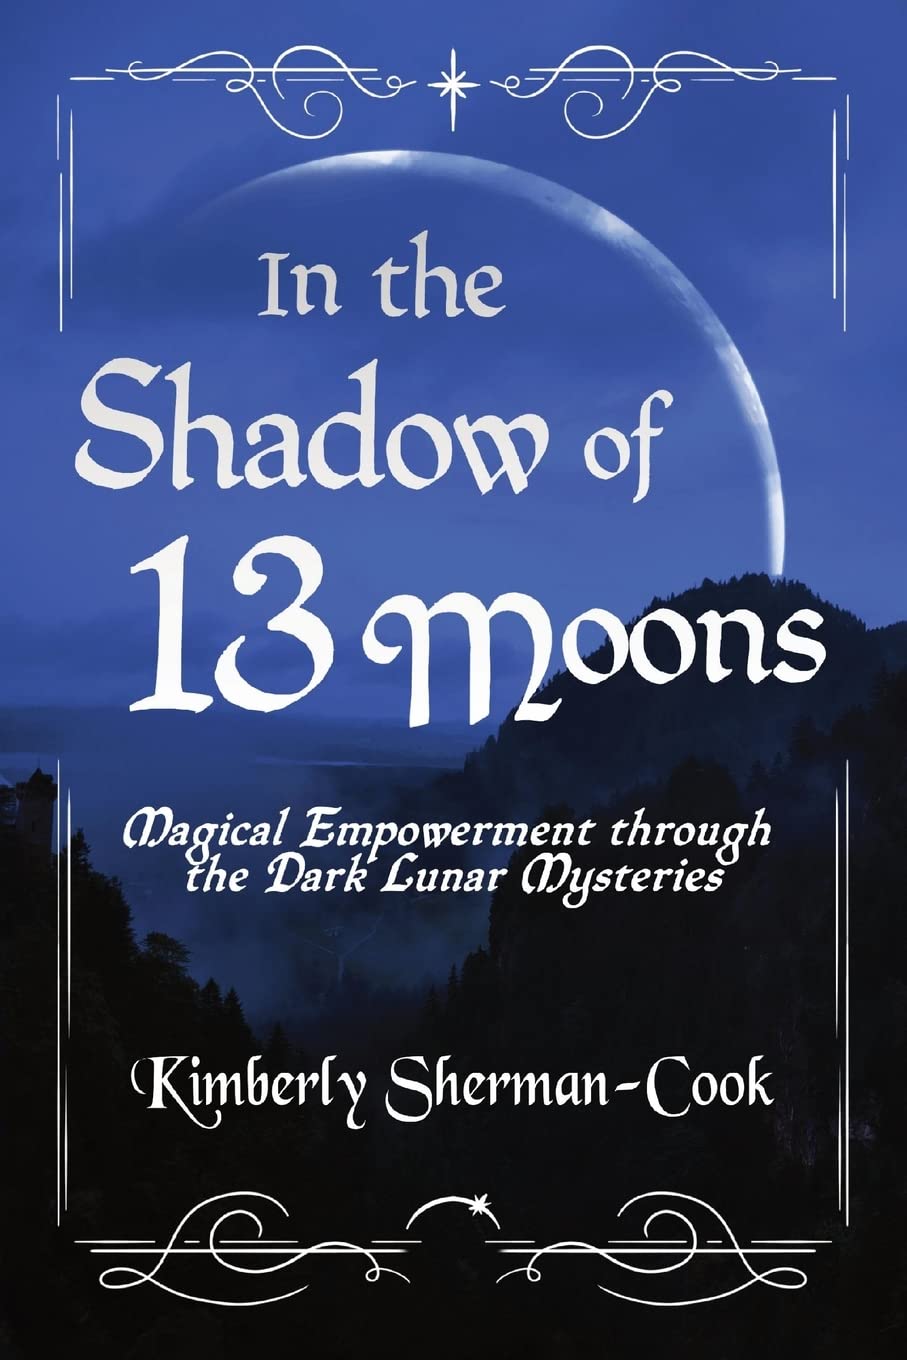 In the Shadow of 13 Moons: Magical Empowerment through the Dark Lunar Mysteries by Kimberly Sherman-Cook